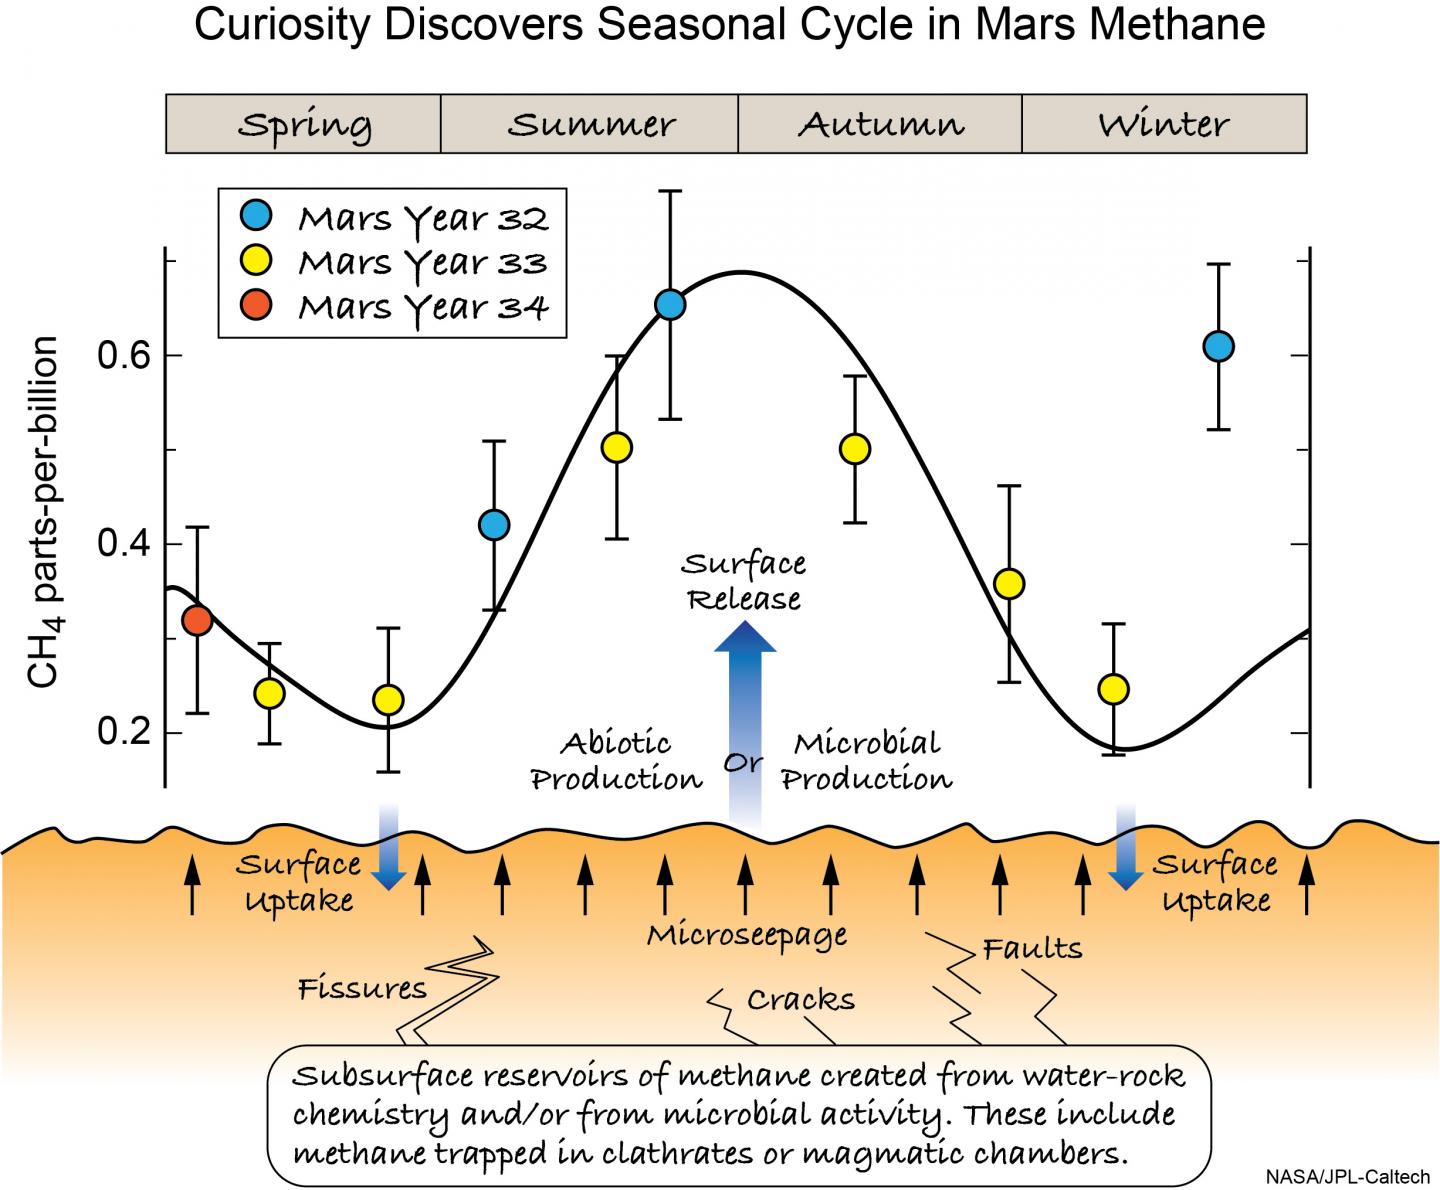 Mars Exhumes Methane on a Seasonal Cycle, Curiosity Reveals; Rover Also Detects Ancient Organic Matter (1 of 1)